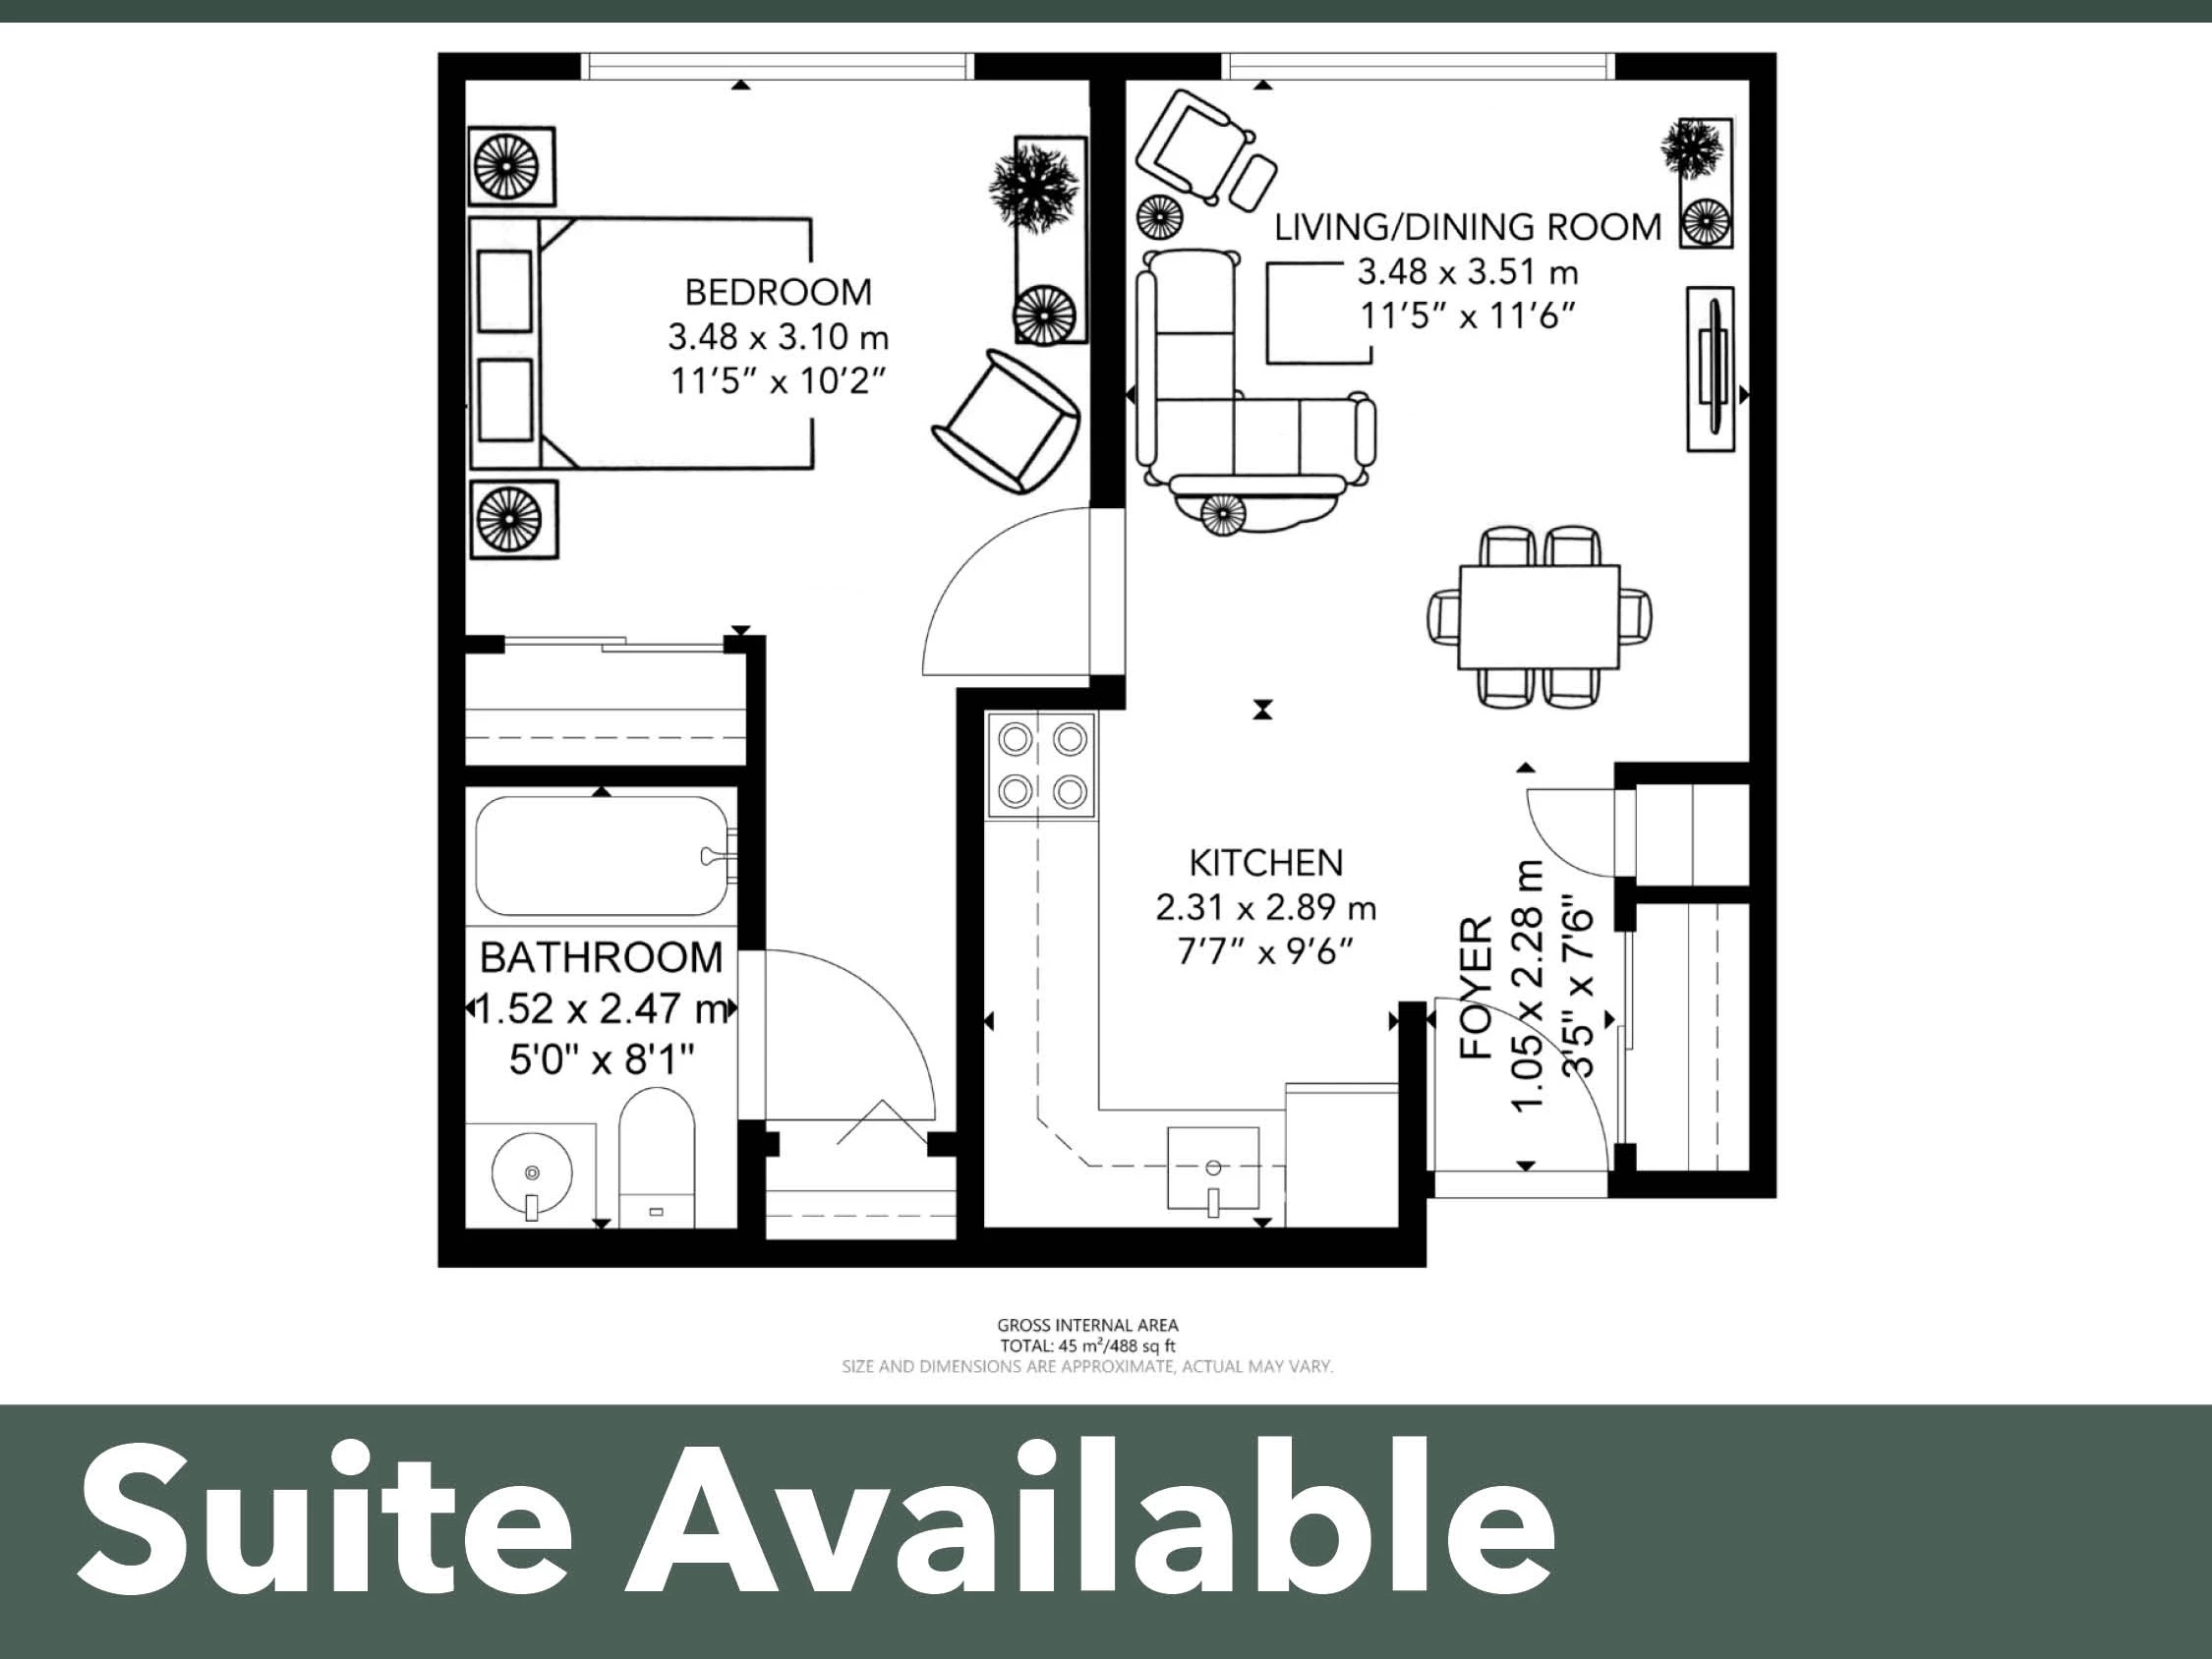 Another suite available. This floorplan shows a bedroom, a bathroom, a living and dining room, as well as a kitchen.